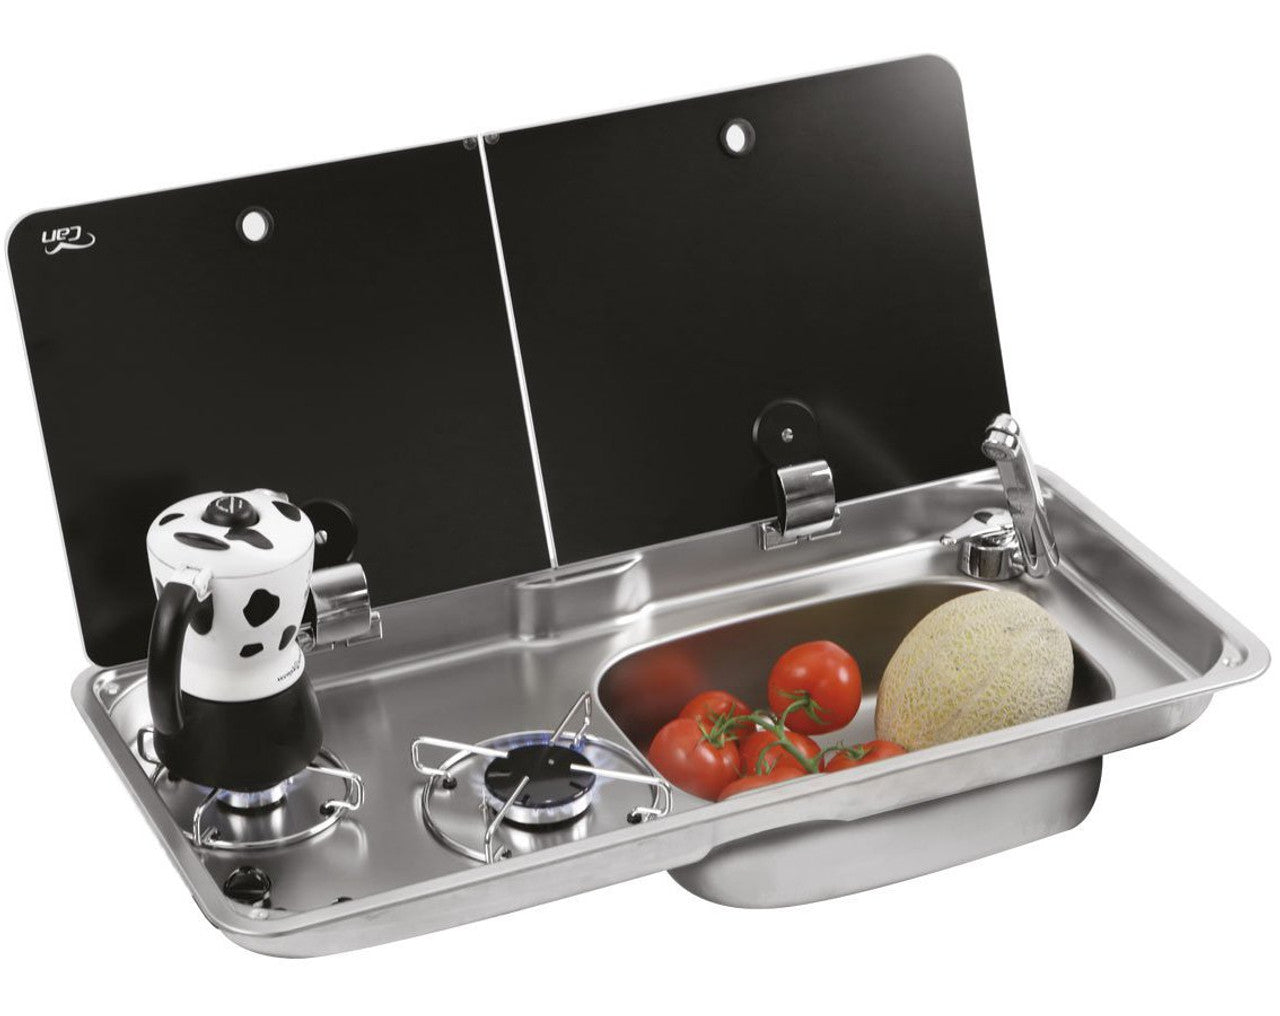 Tailored Kitchen Solutions: Your Choice of CCCAMPERS' Customisable Cooking and Sink Options